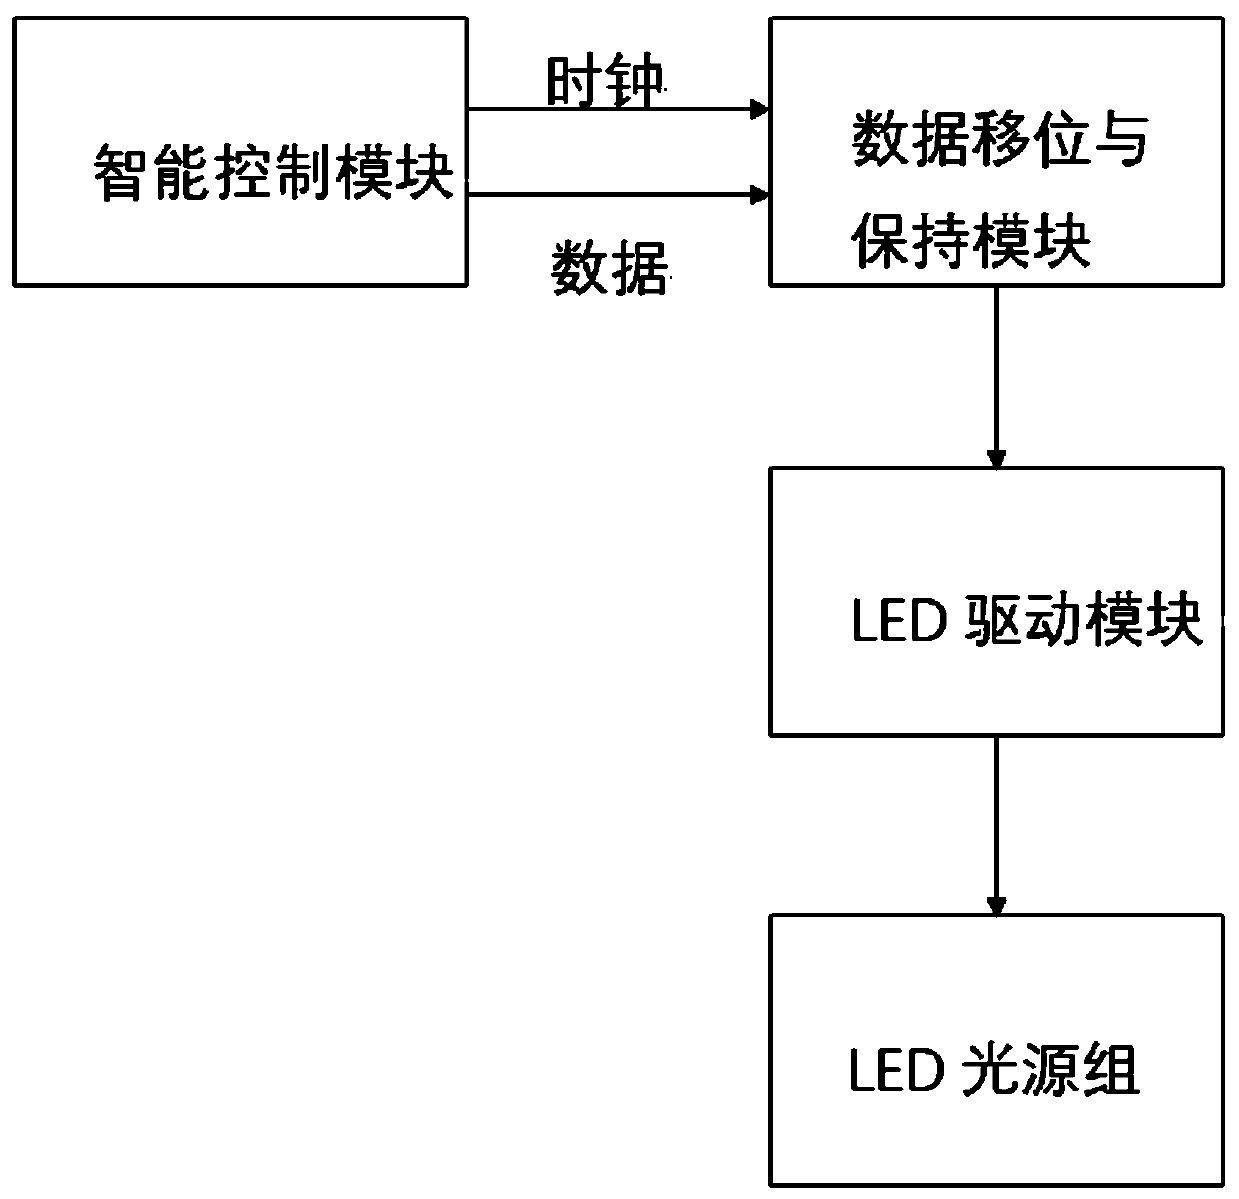 Control circuit for vehicle LED display lamp